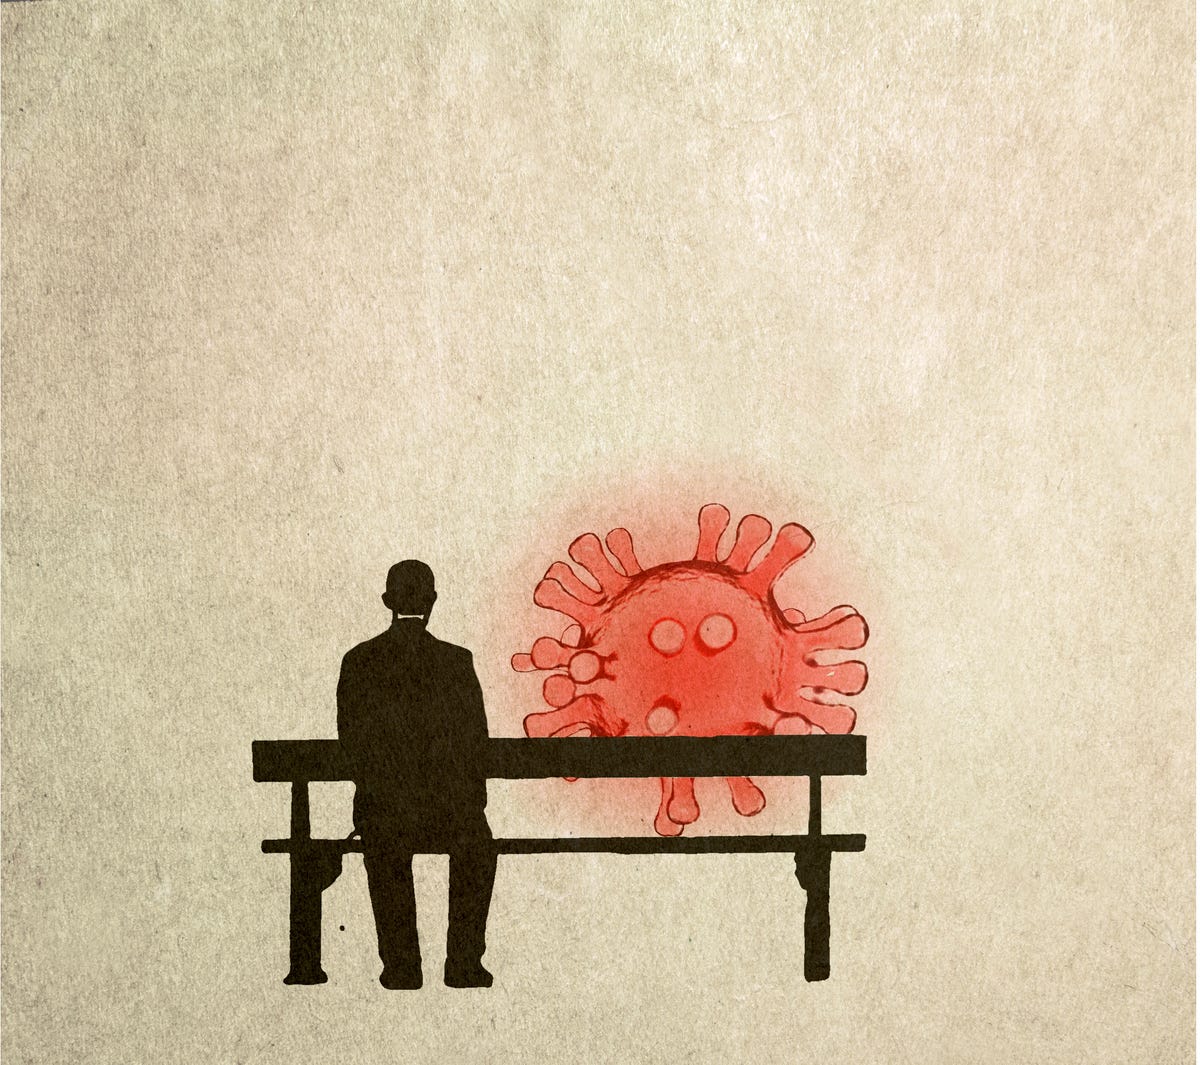 An illustration of a man sitting on a bench with a COVID virus particle looming in the distance